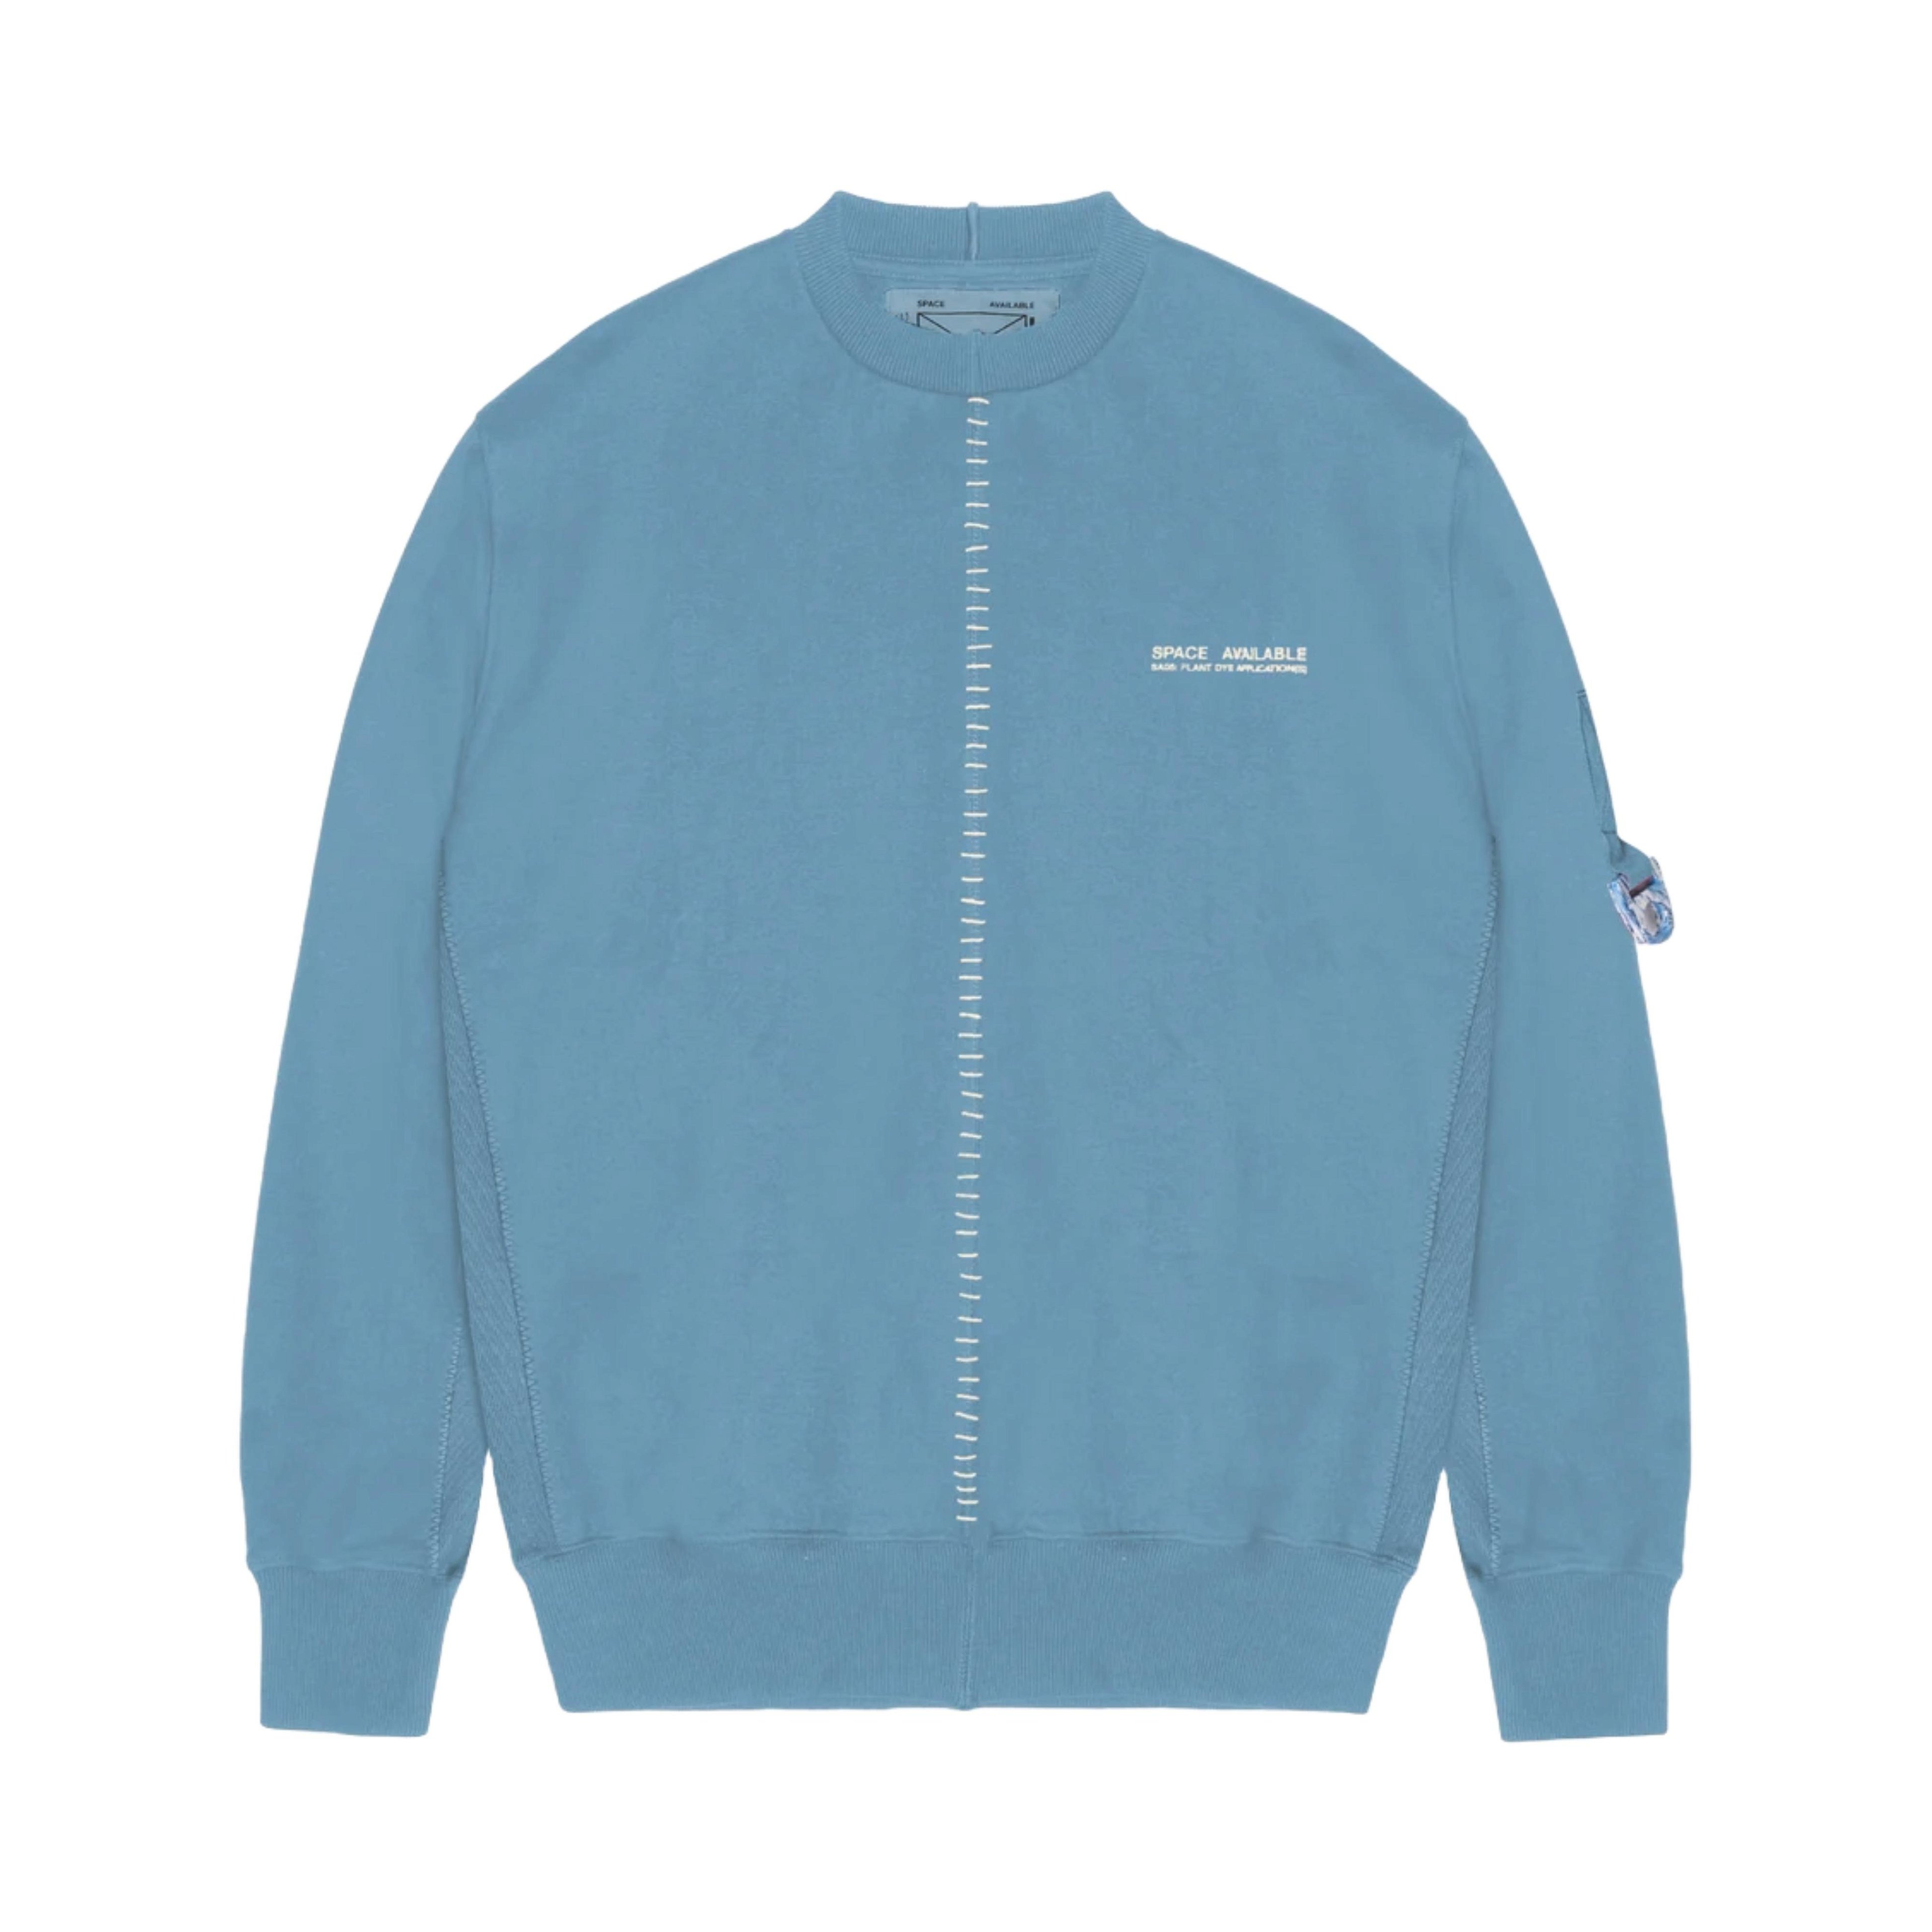 SPACE AVAILABLE - Men's Plant Dyed Artisan Sweat - (Blue) by SPACE AVAILABLE